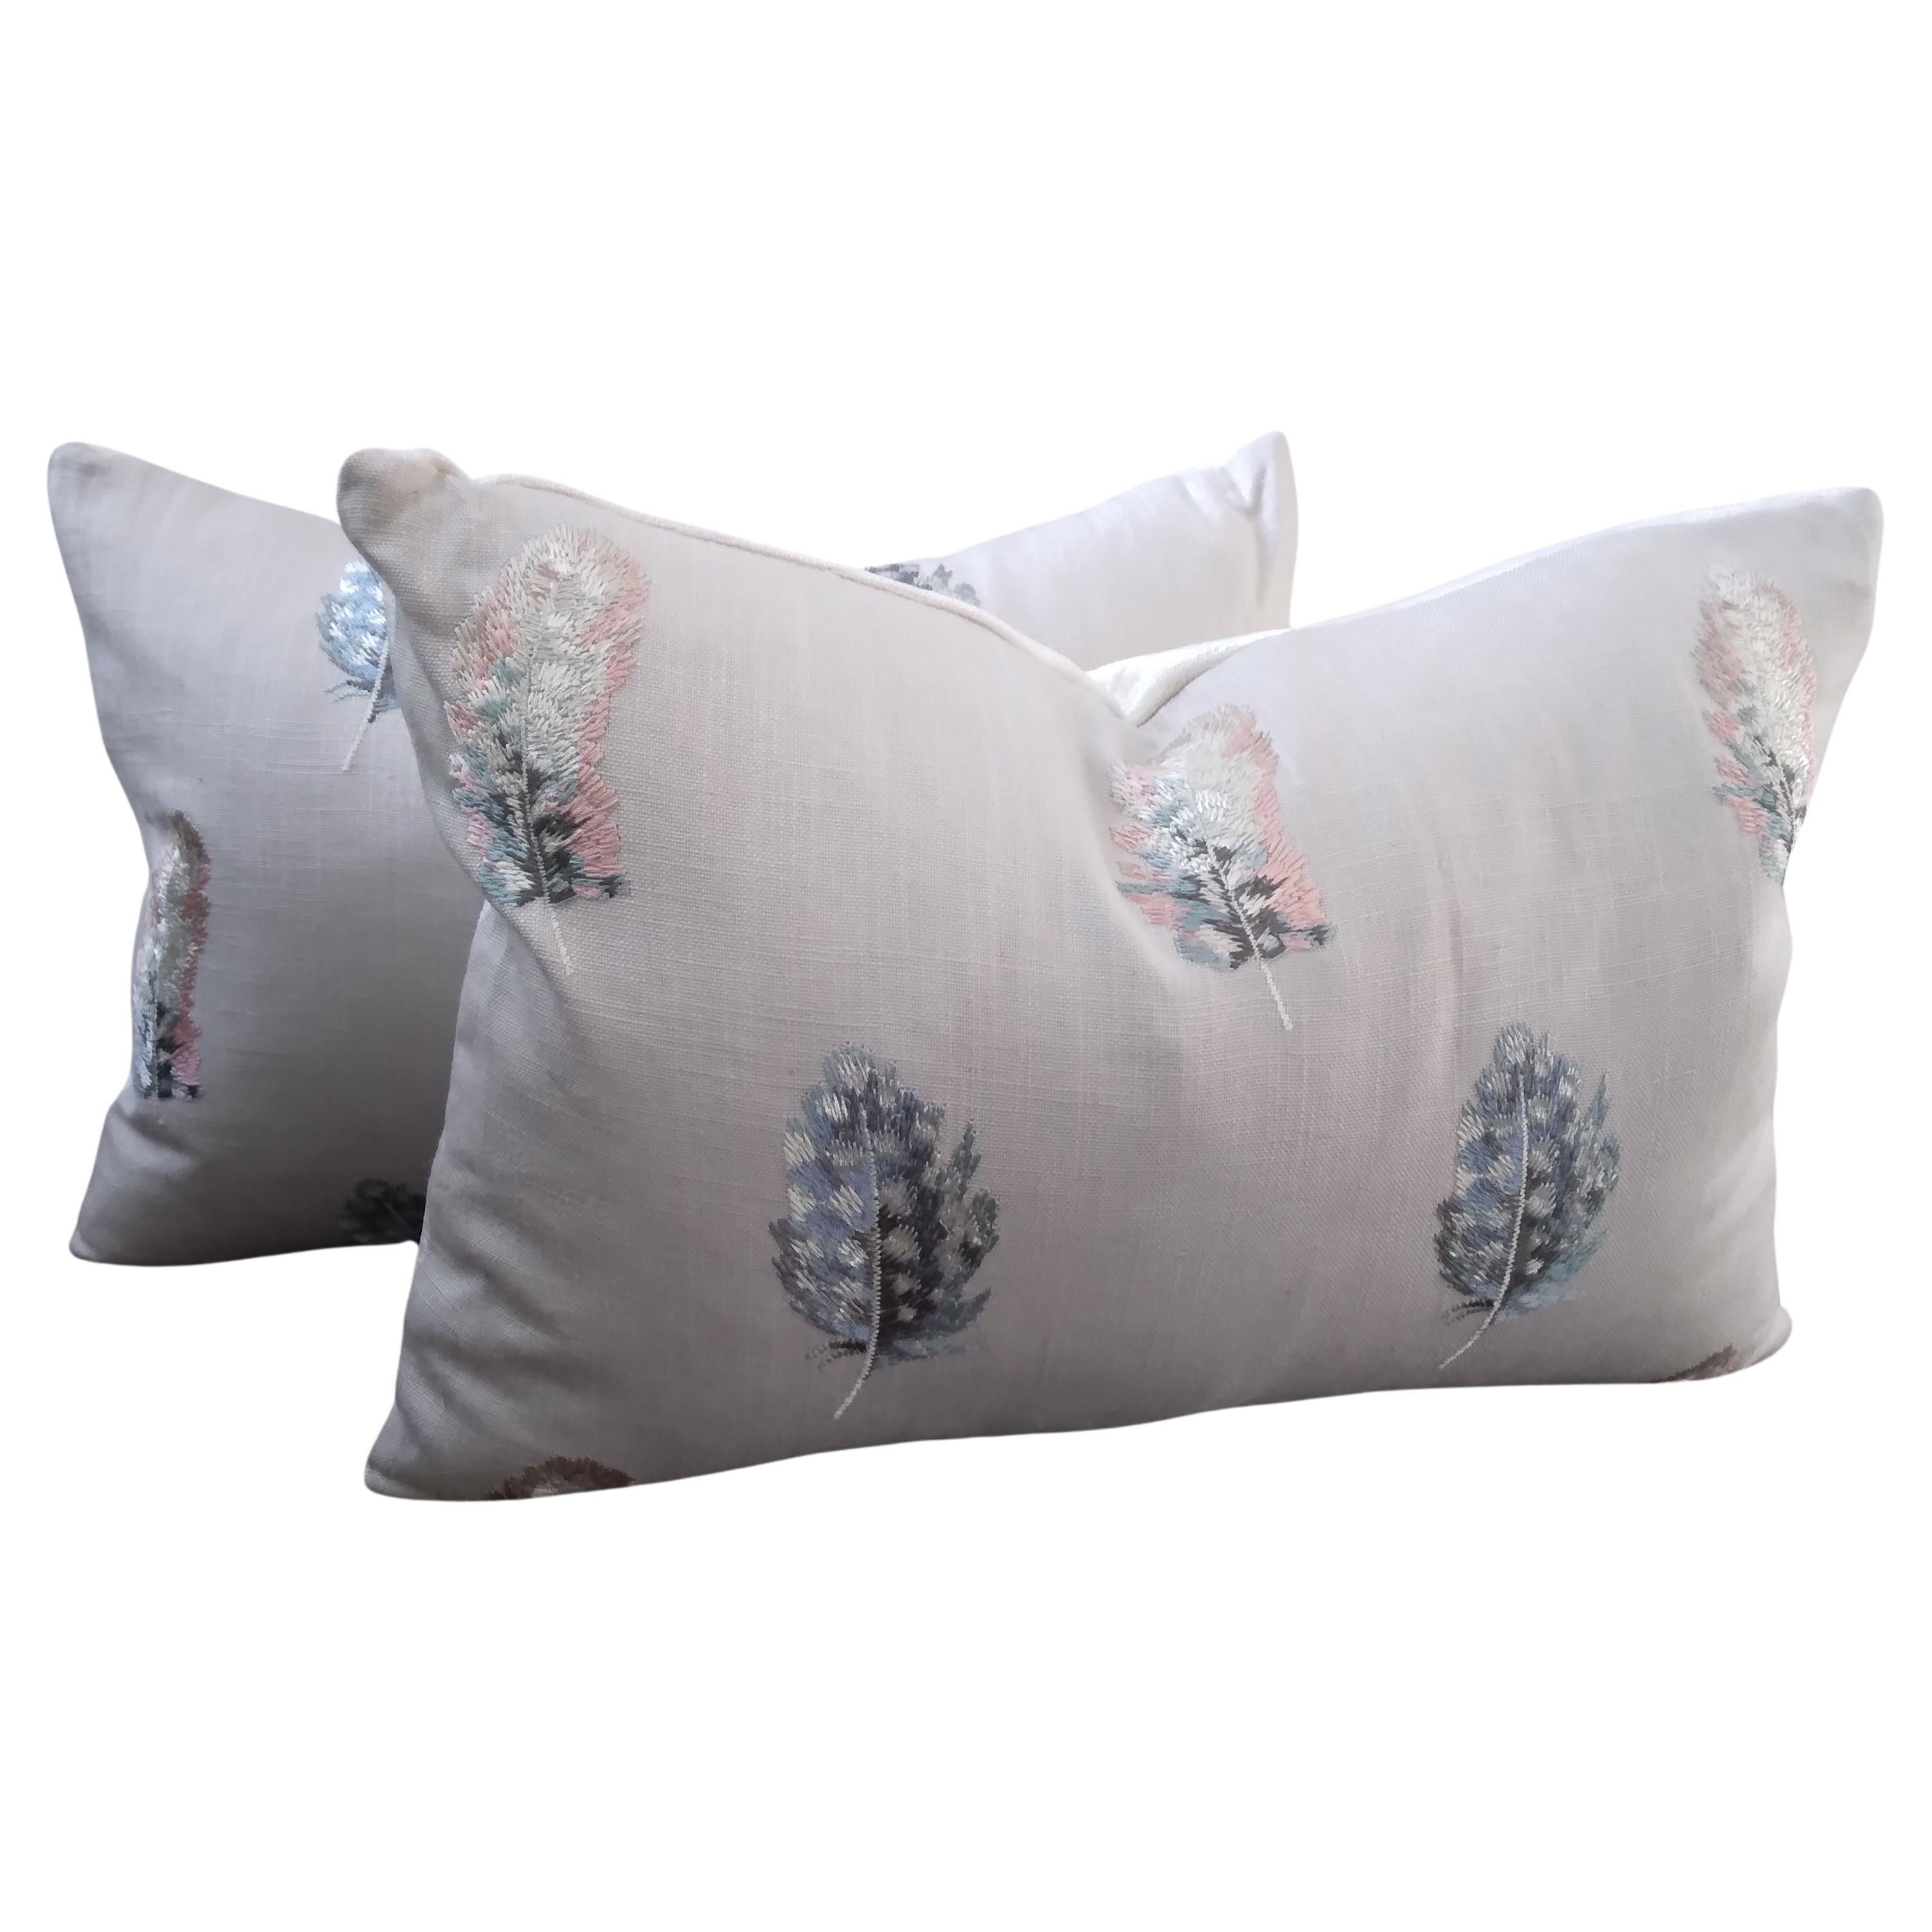 Embroidered Bird Feather Throw Pillows in Pastel Pink and Blue For Sale